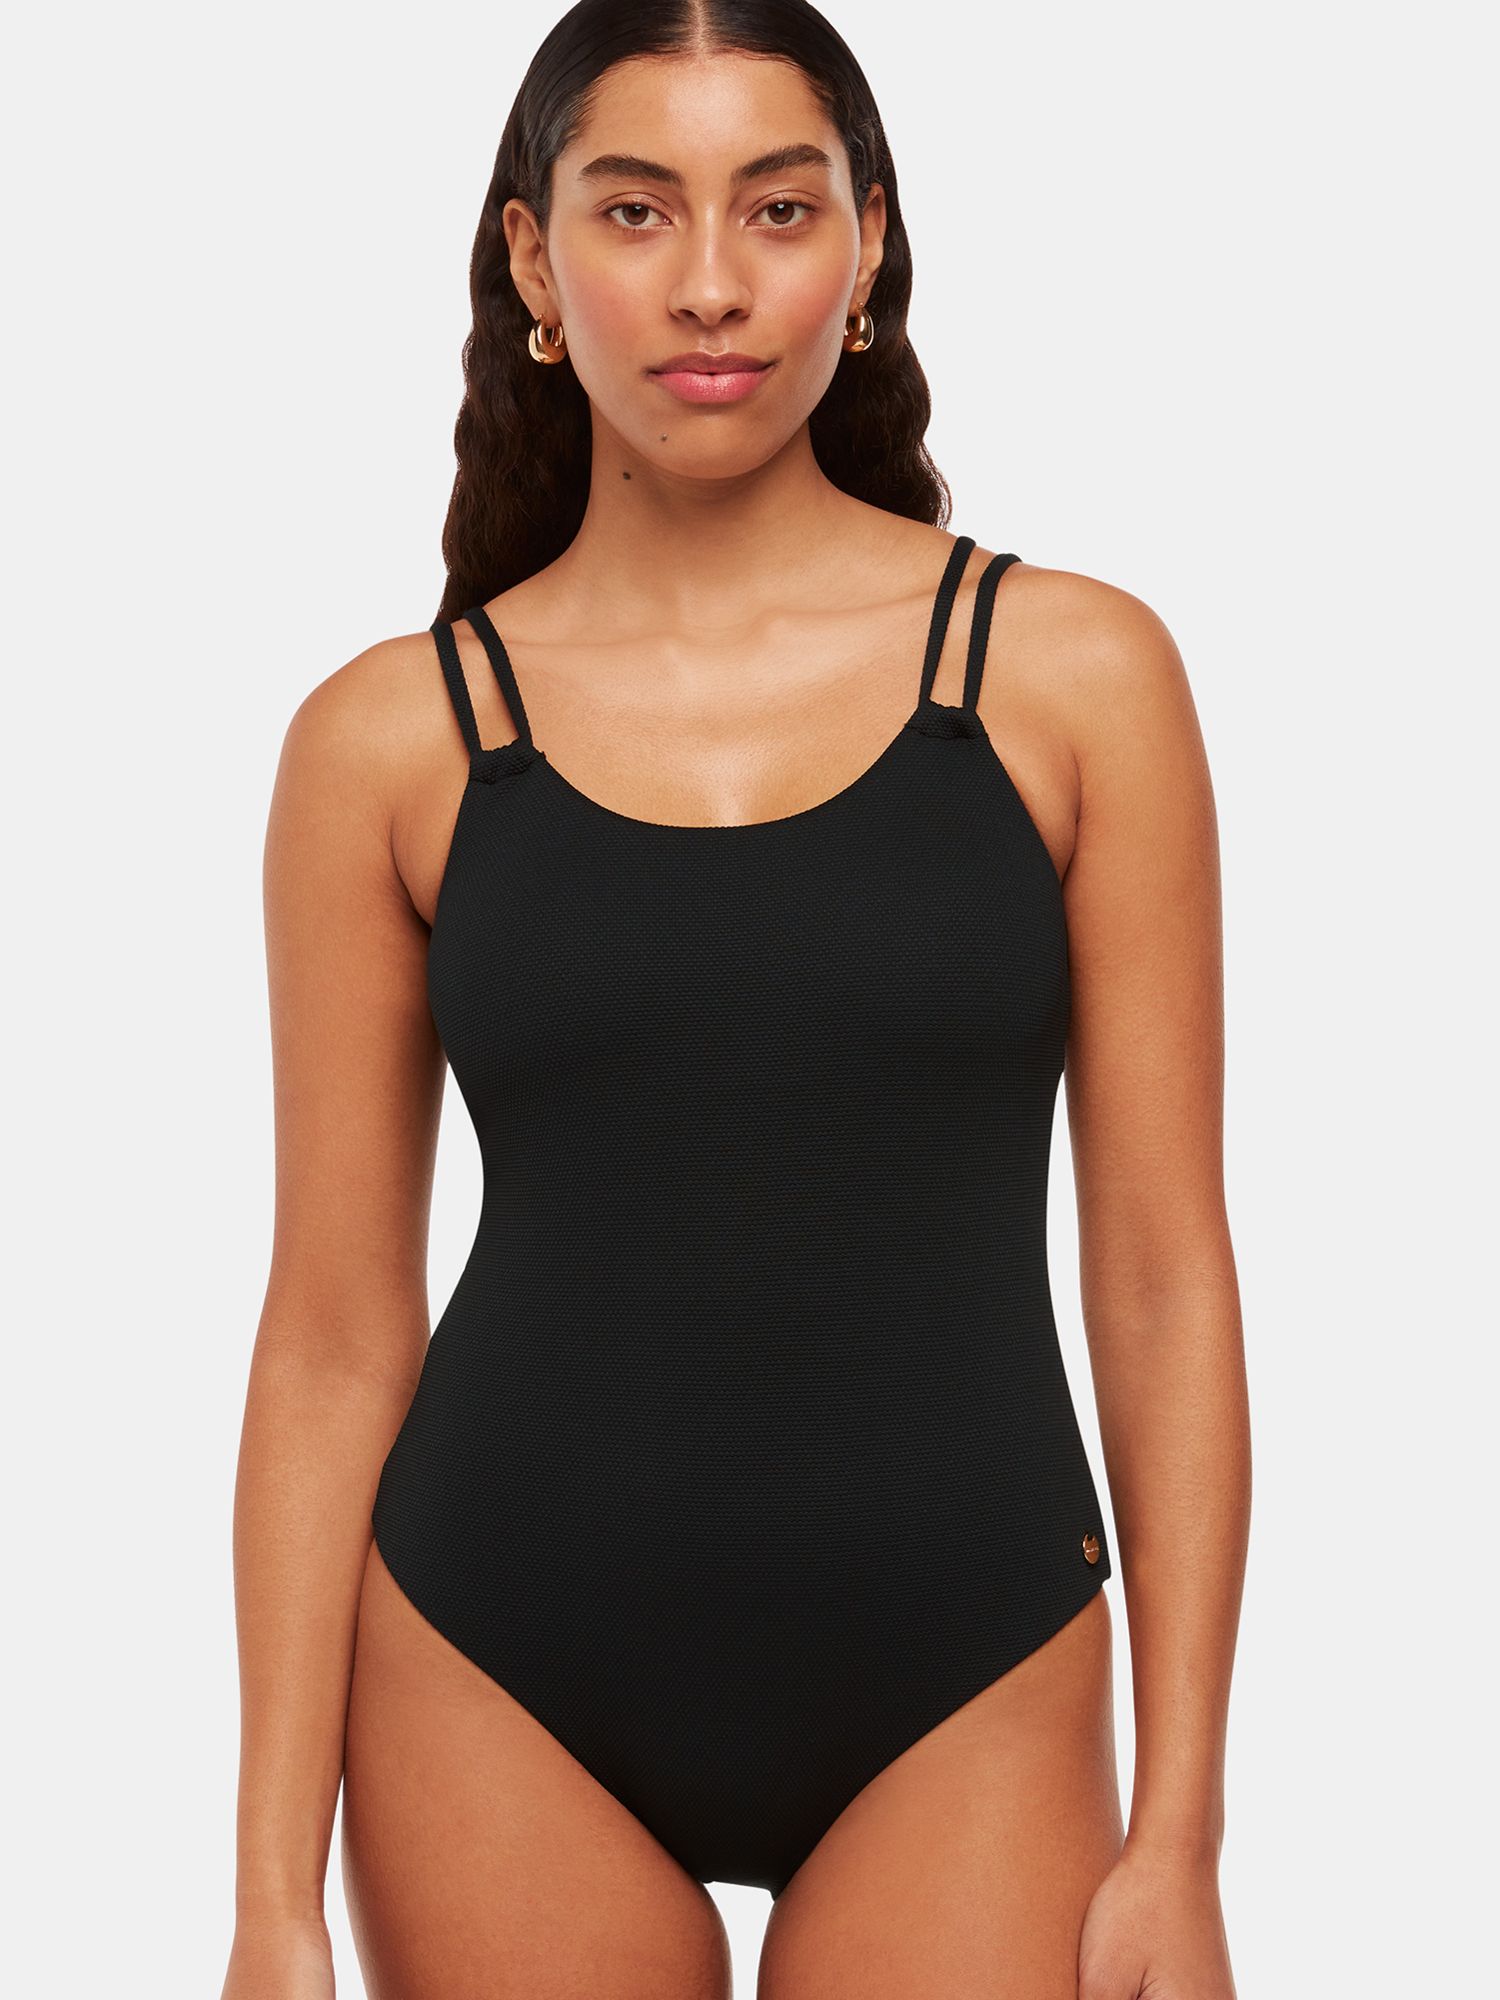 Whistles Double Strap Textured Swimsuit, Black, 6